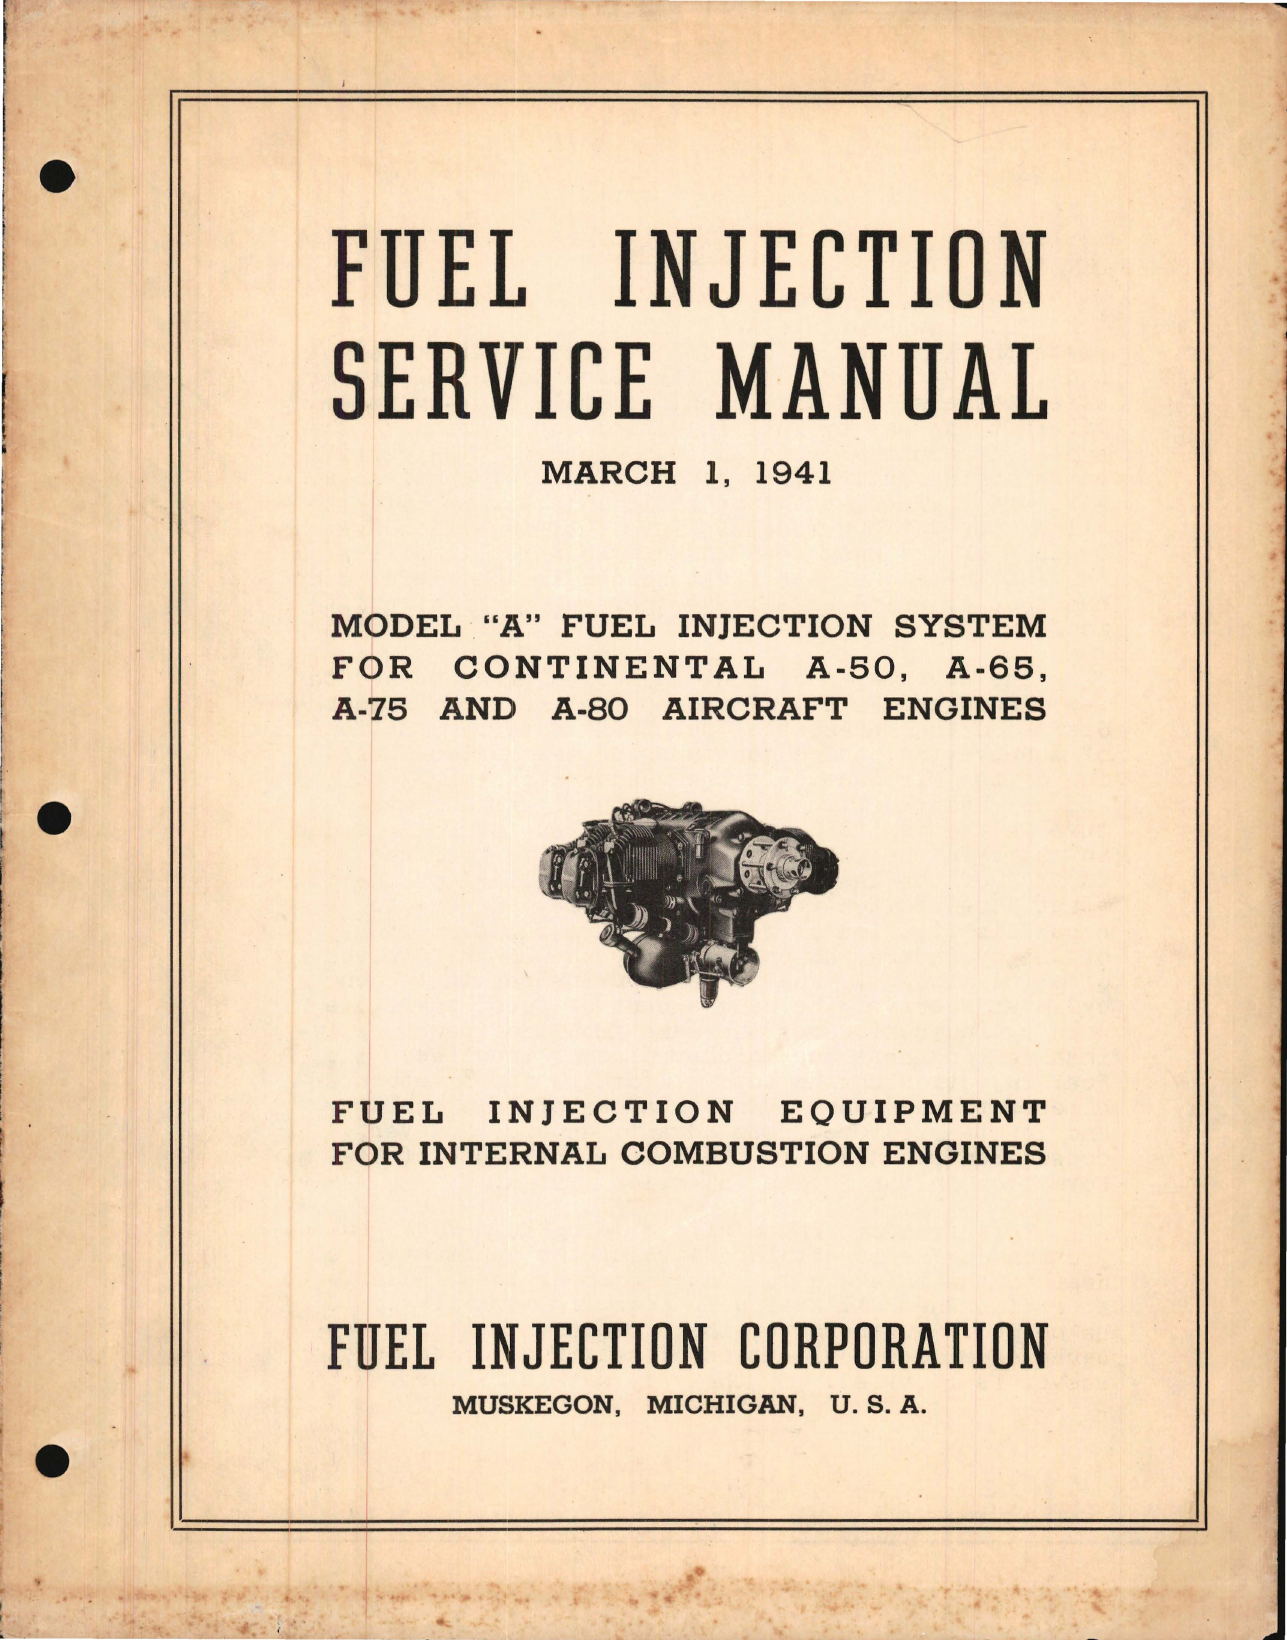 Sample page 1 from AirCorps Library document: Service Manual for Model A Fuel Injection System on Continental A-50, A-65, A-75, and A-80 Engines